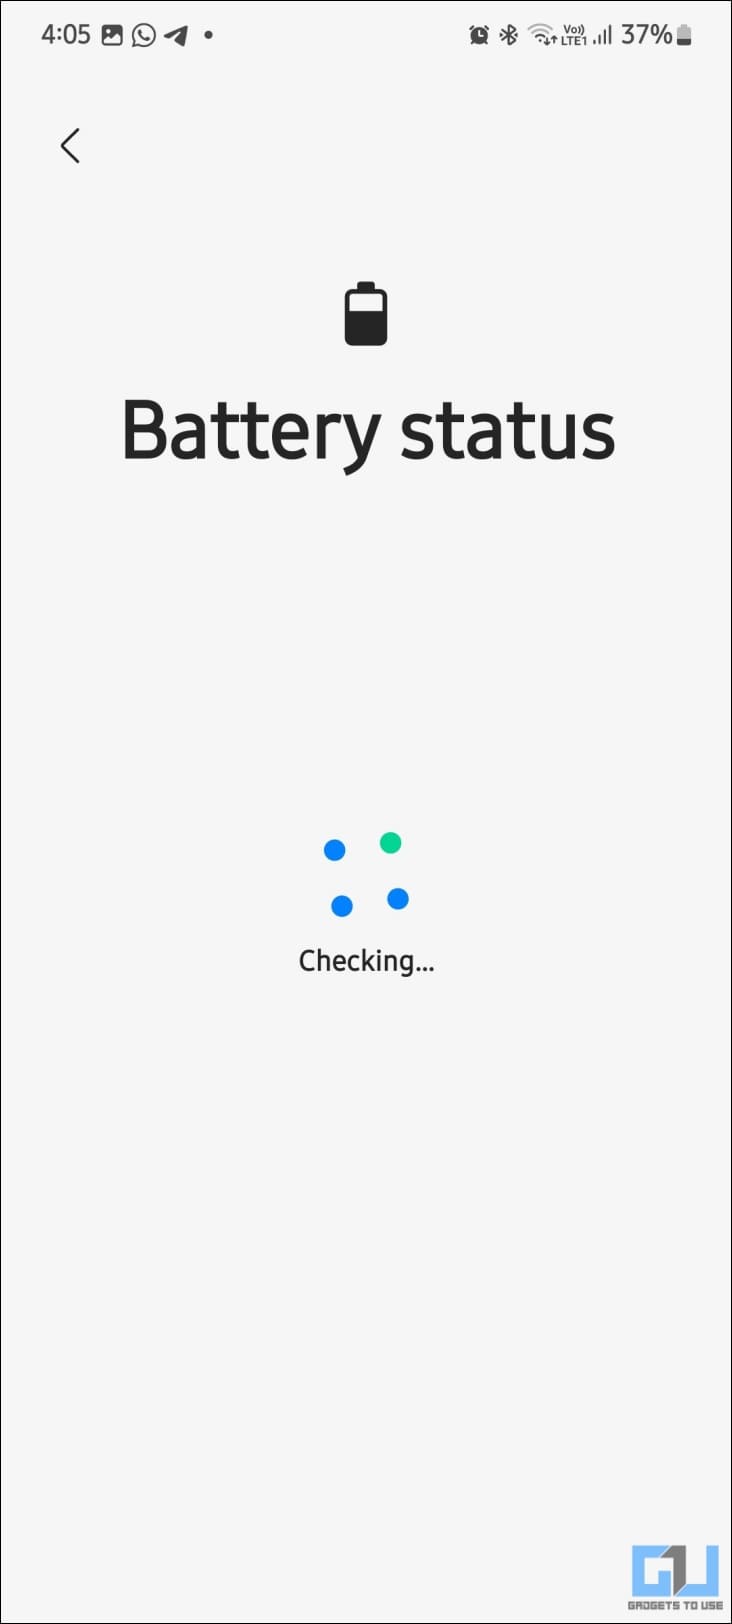 Waiting for Battery Status